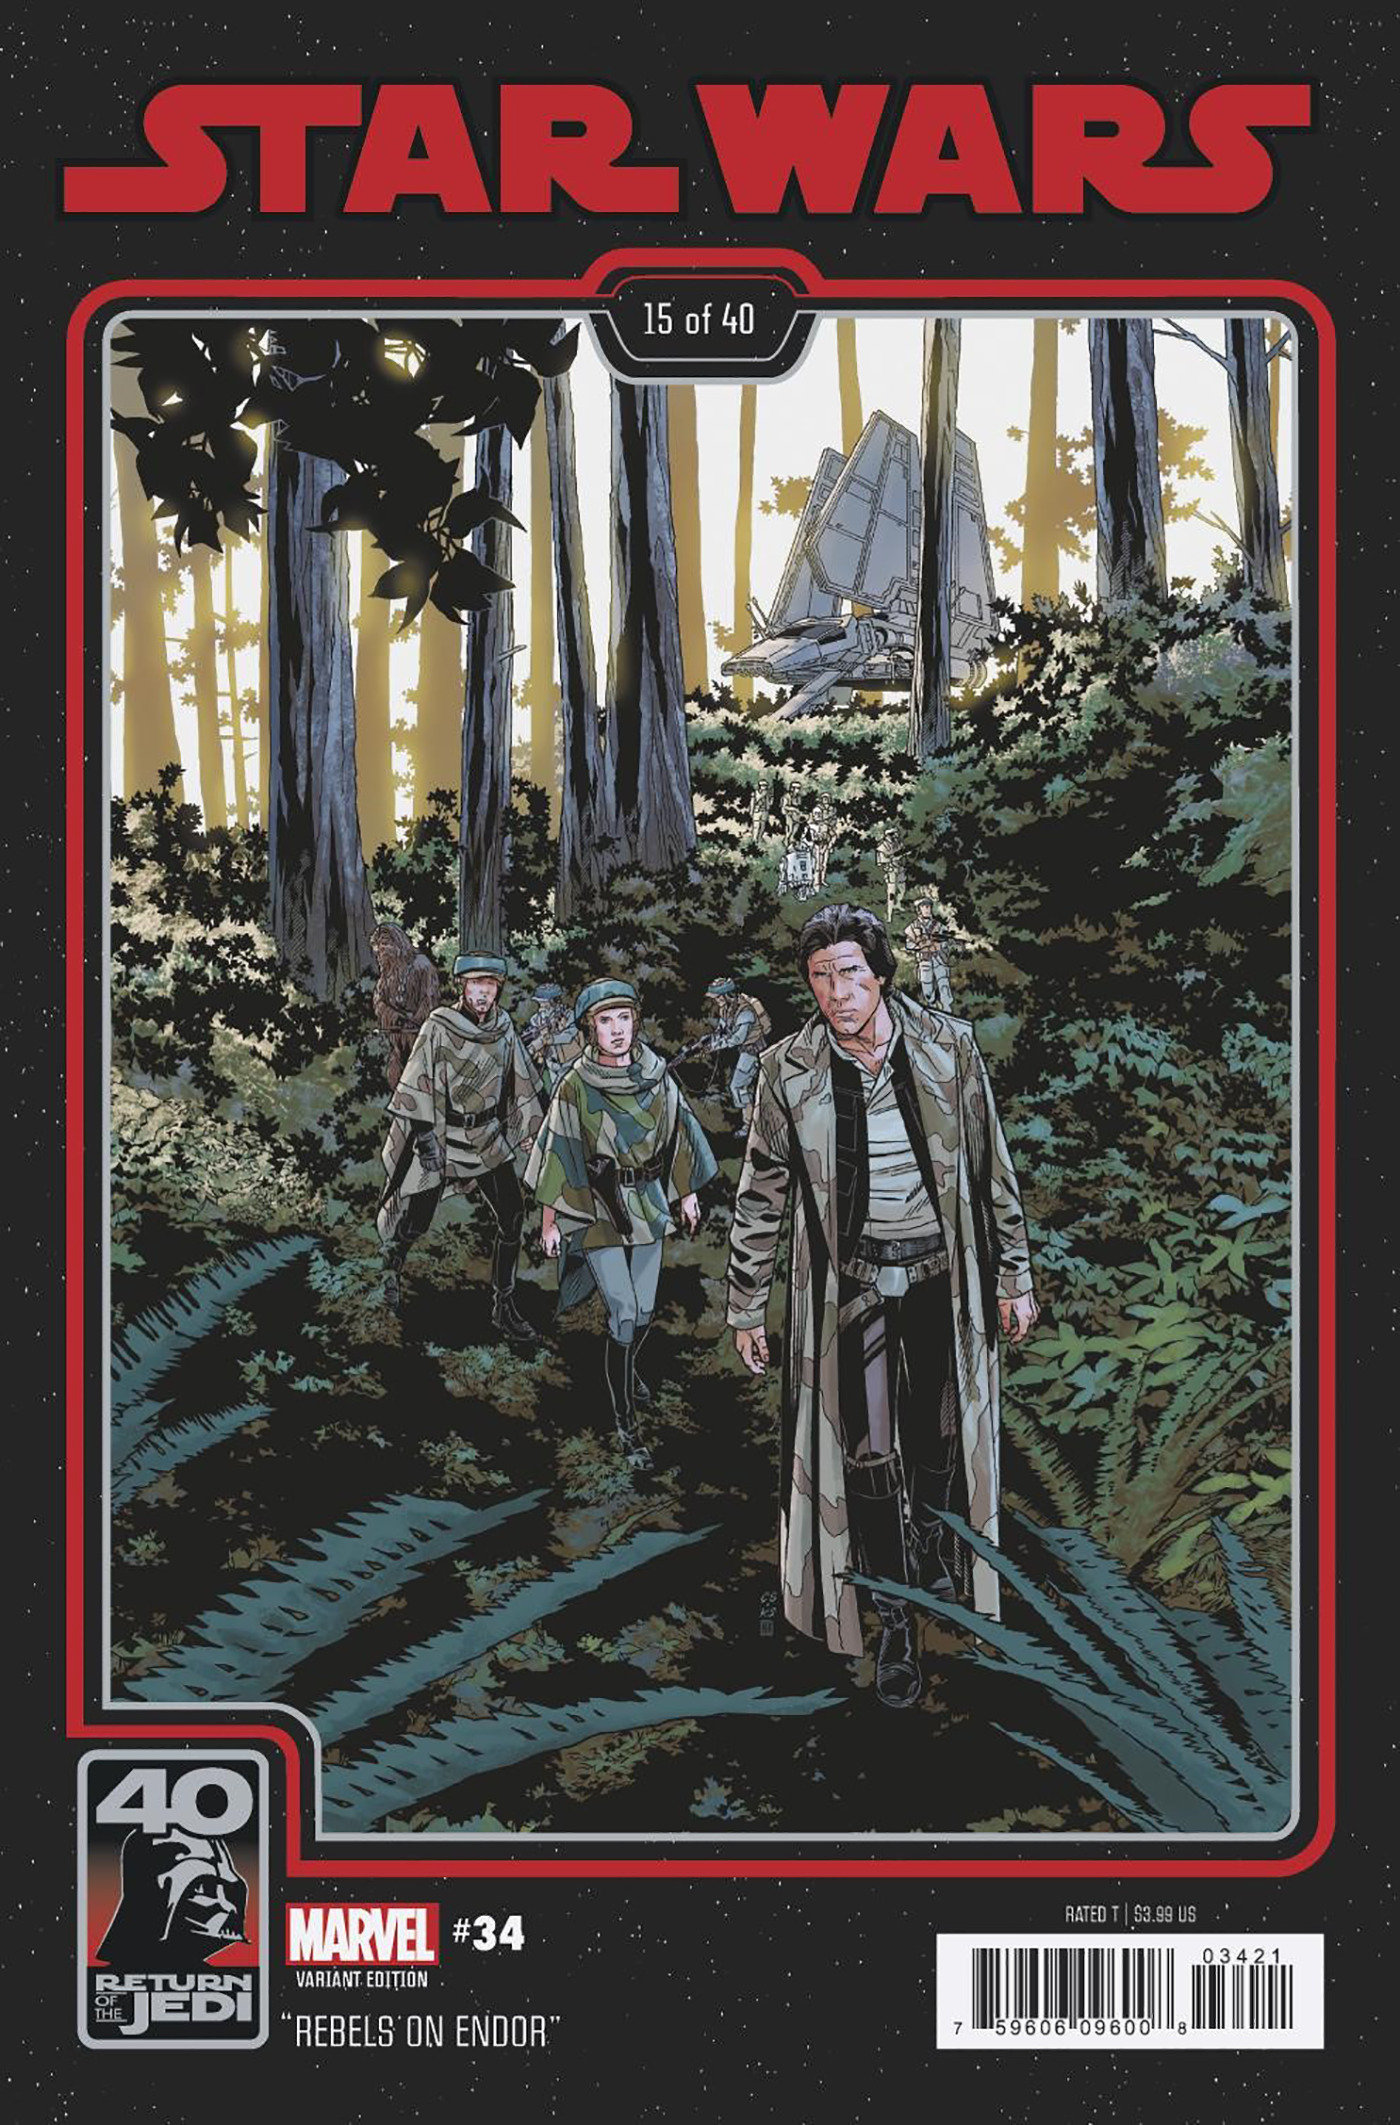 Star Wars #34 Chris Sprouse Return of the Jedi 40th Anniversary Variant (2020)